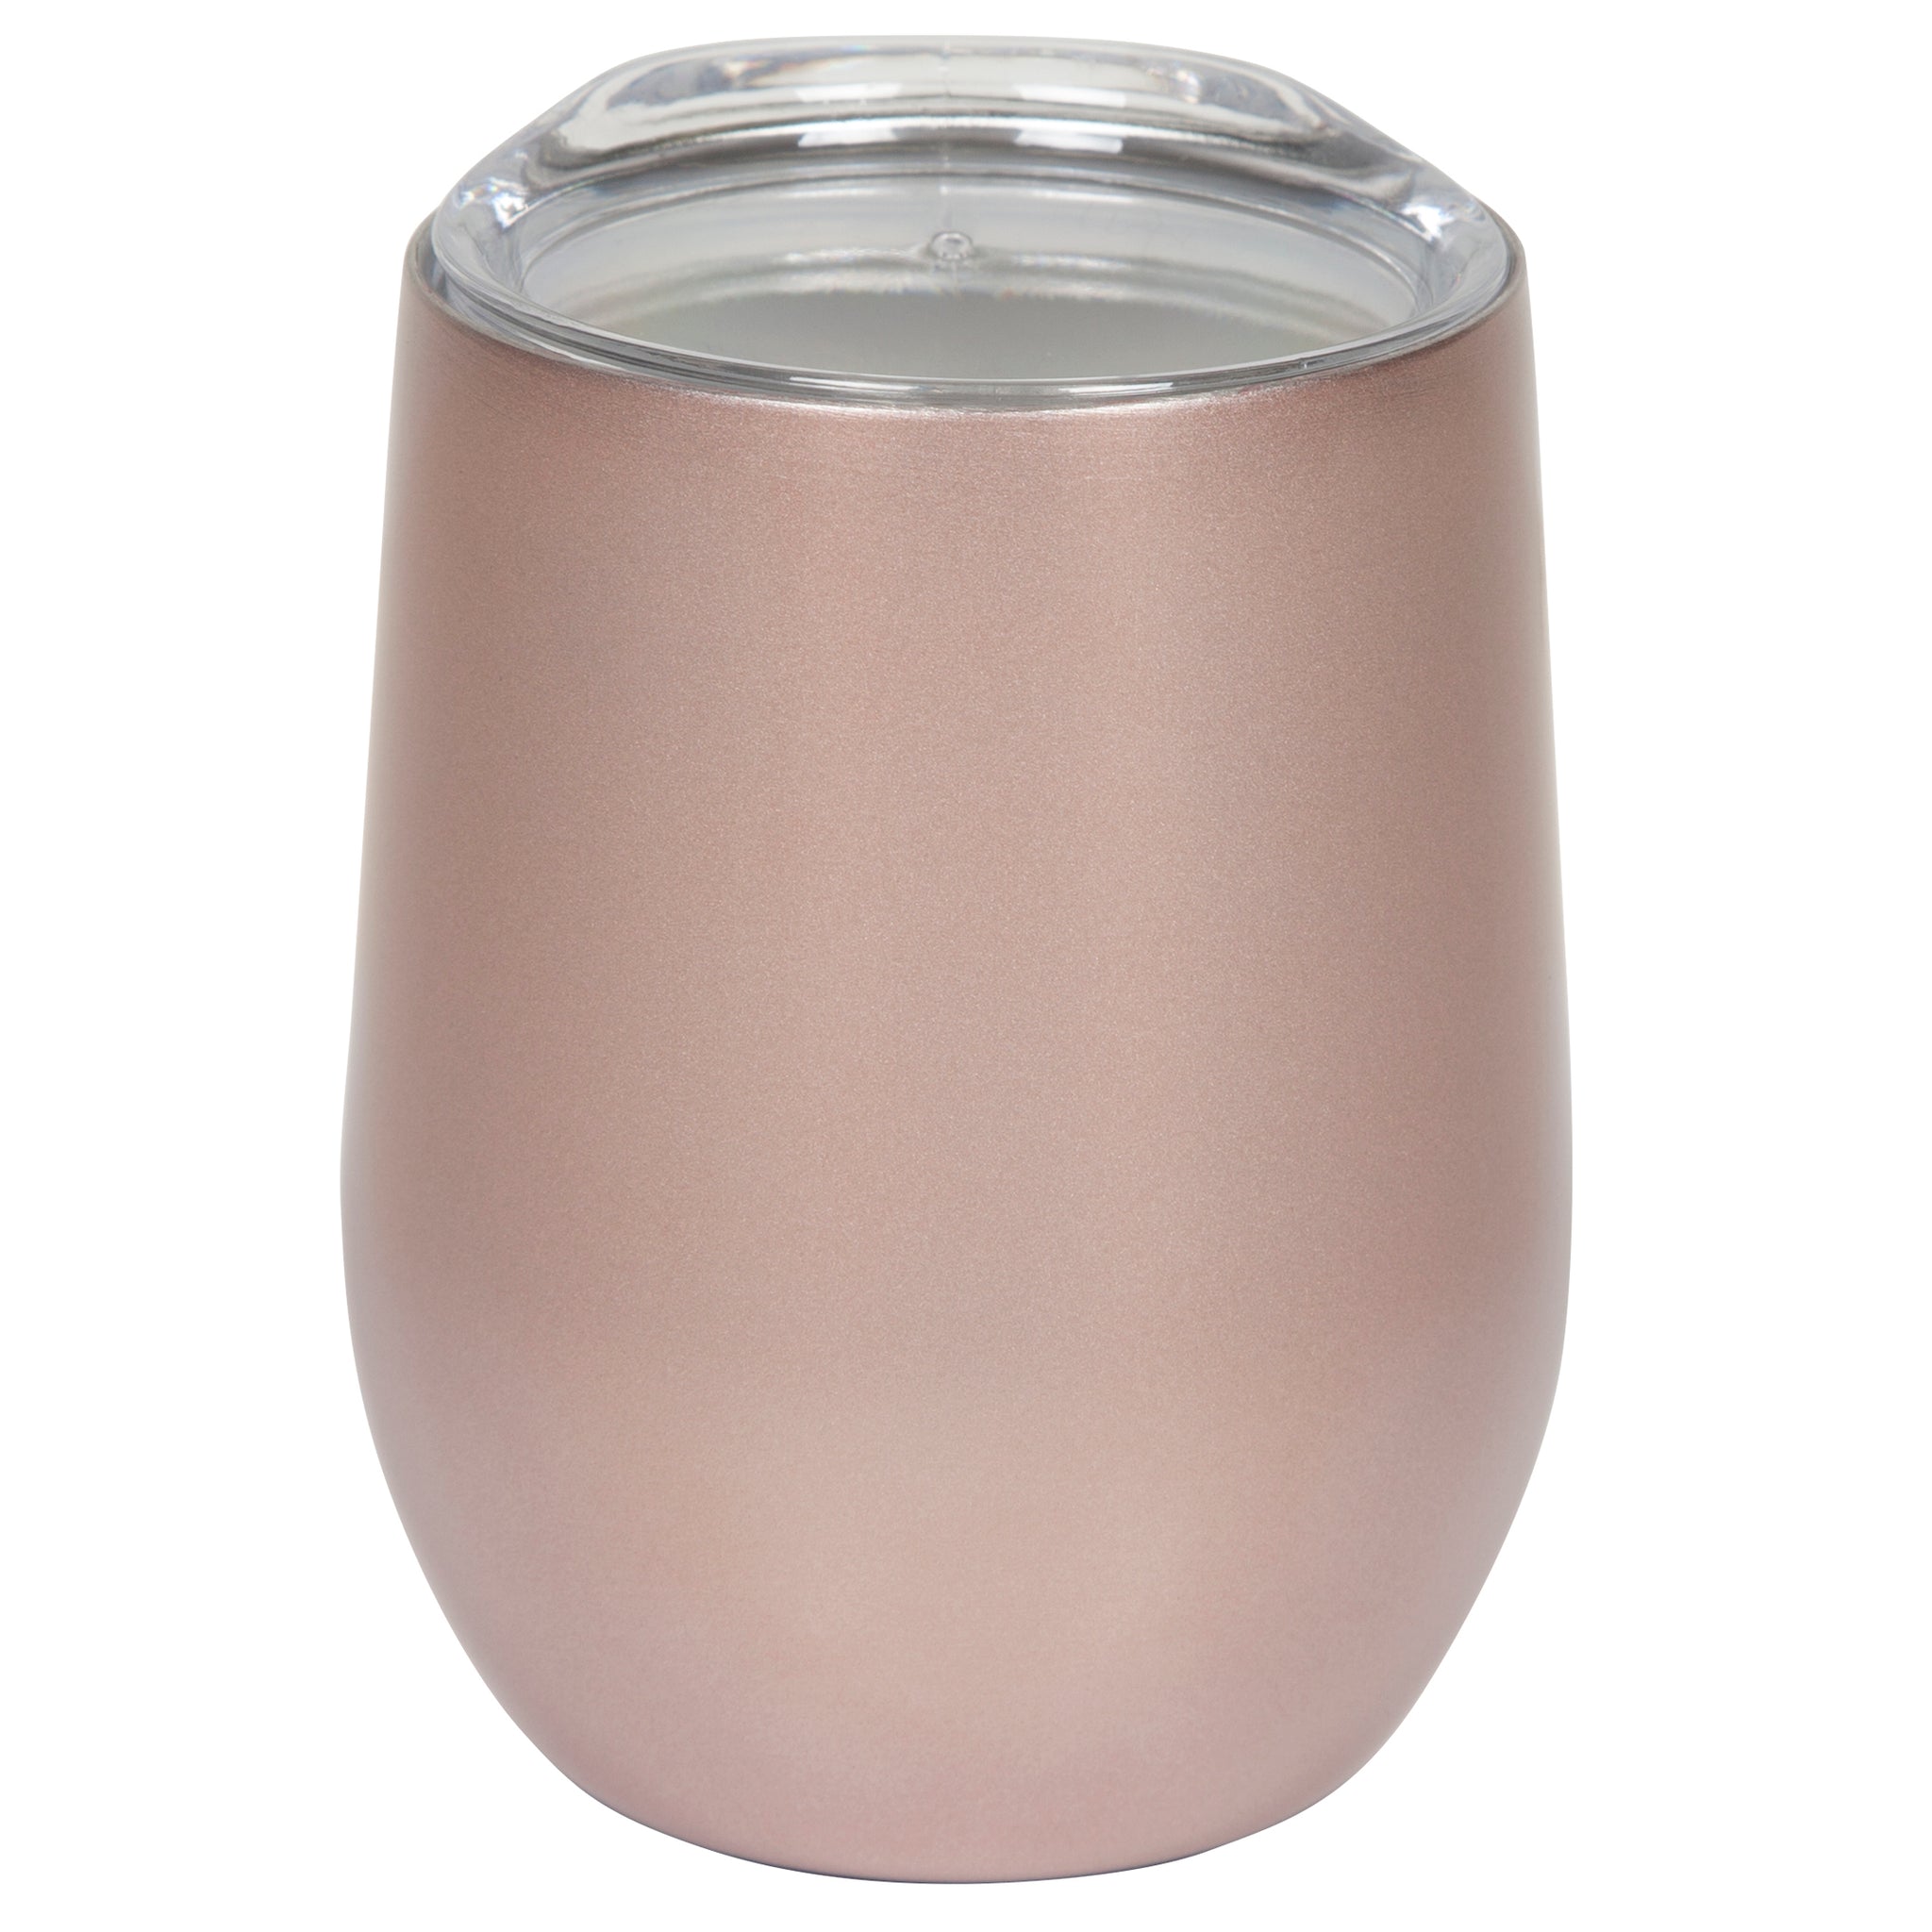 Hands Down, The Best Insulated Wine Tumbler You Can Buy